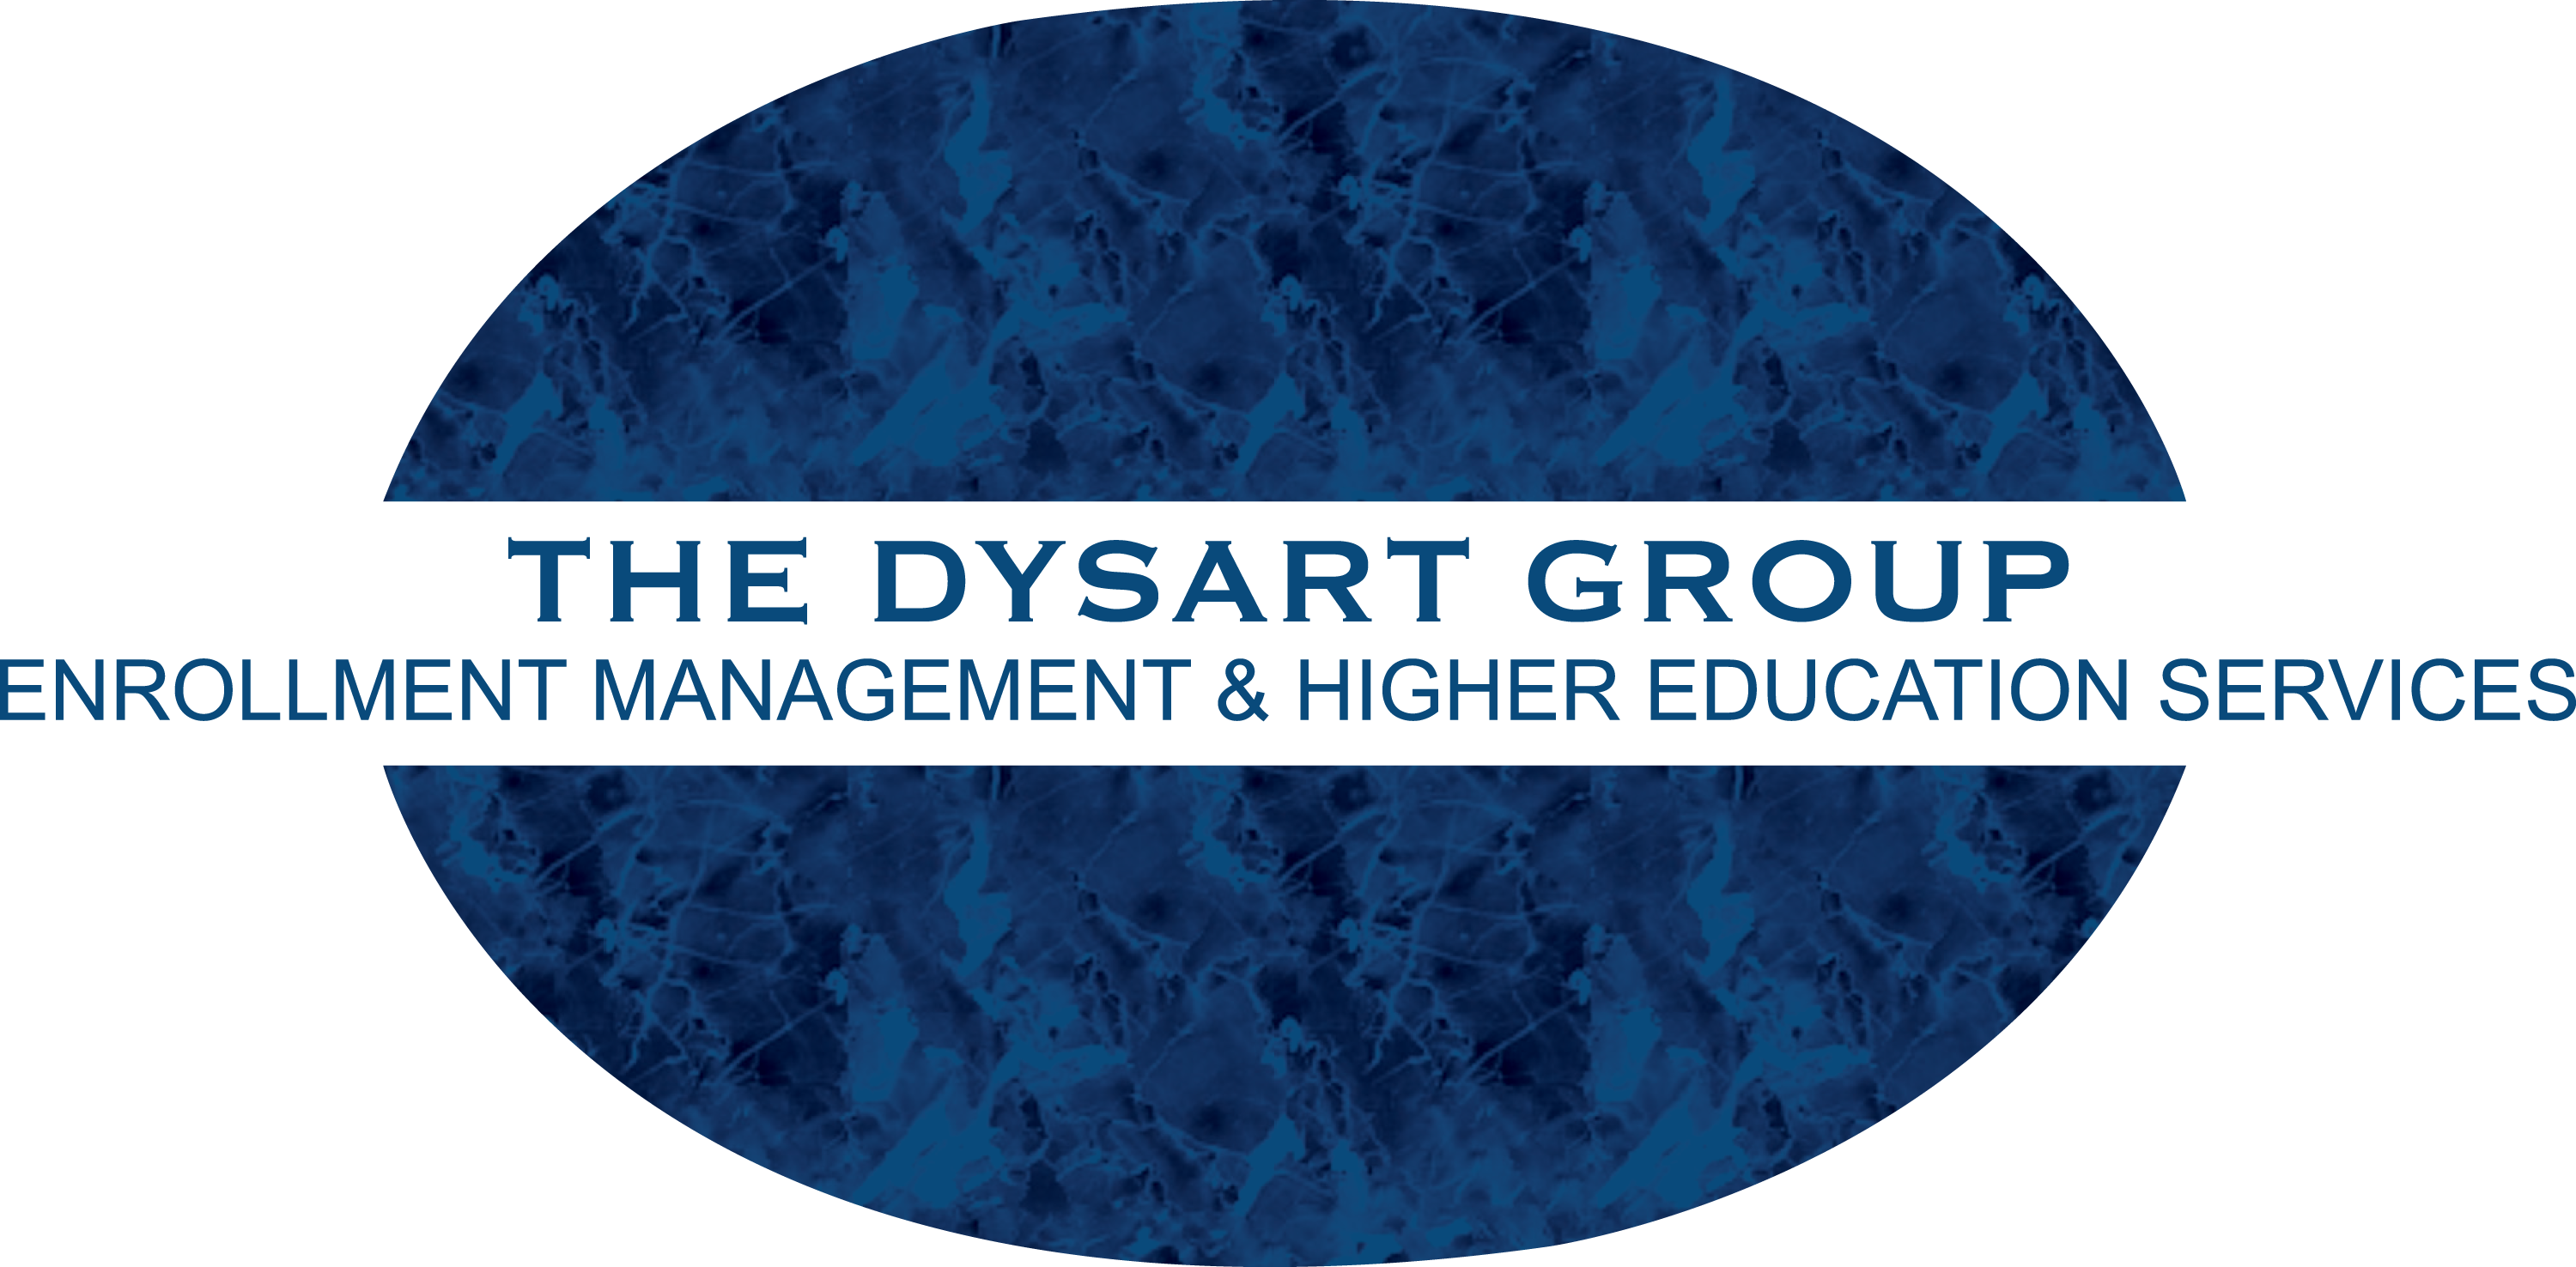 The Dysart Group